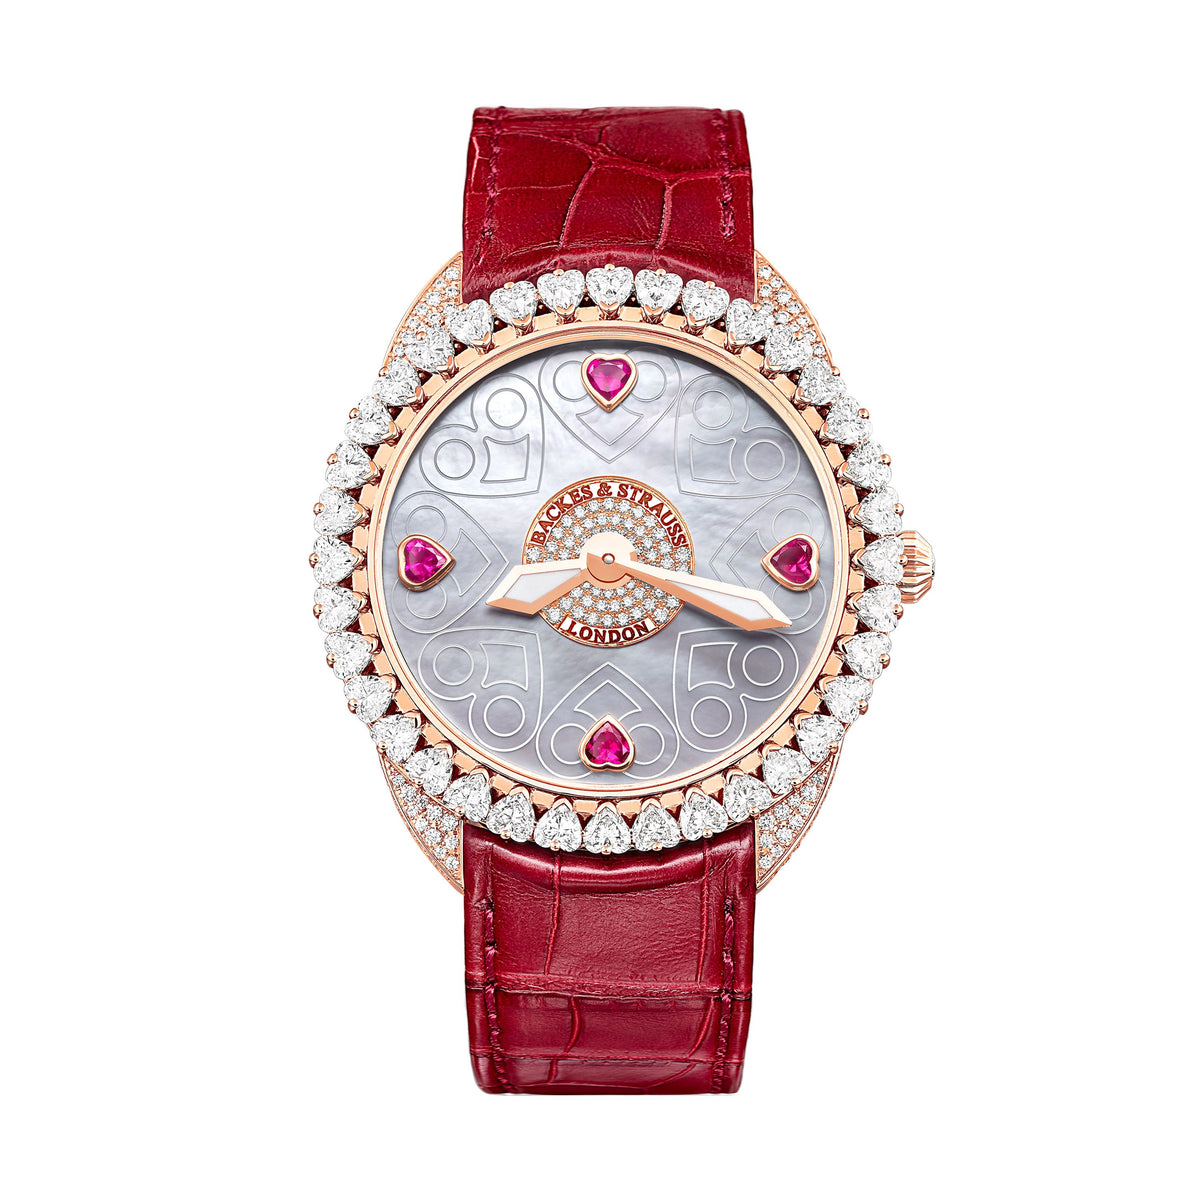 Queen of Hearts 40 Luxury Diamond Watch for Women - 40 mm Rose Gold - Backes & Strauss